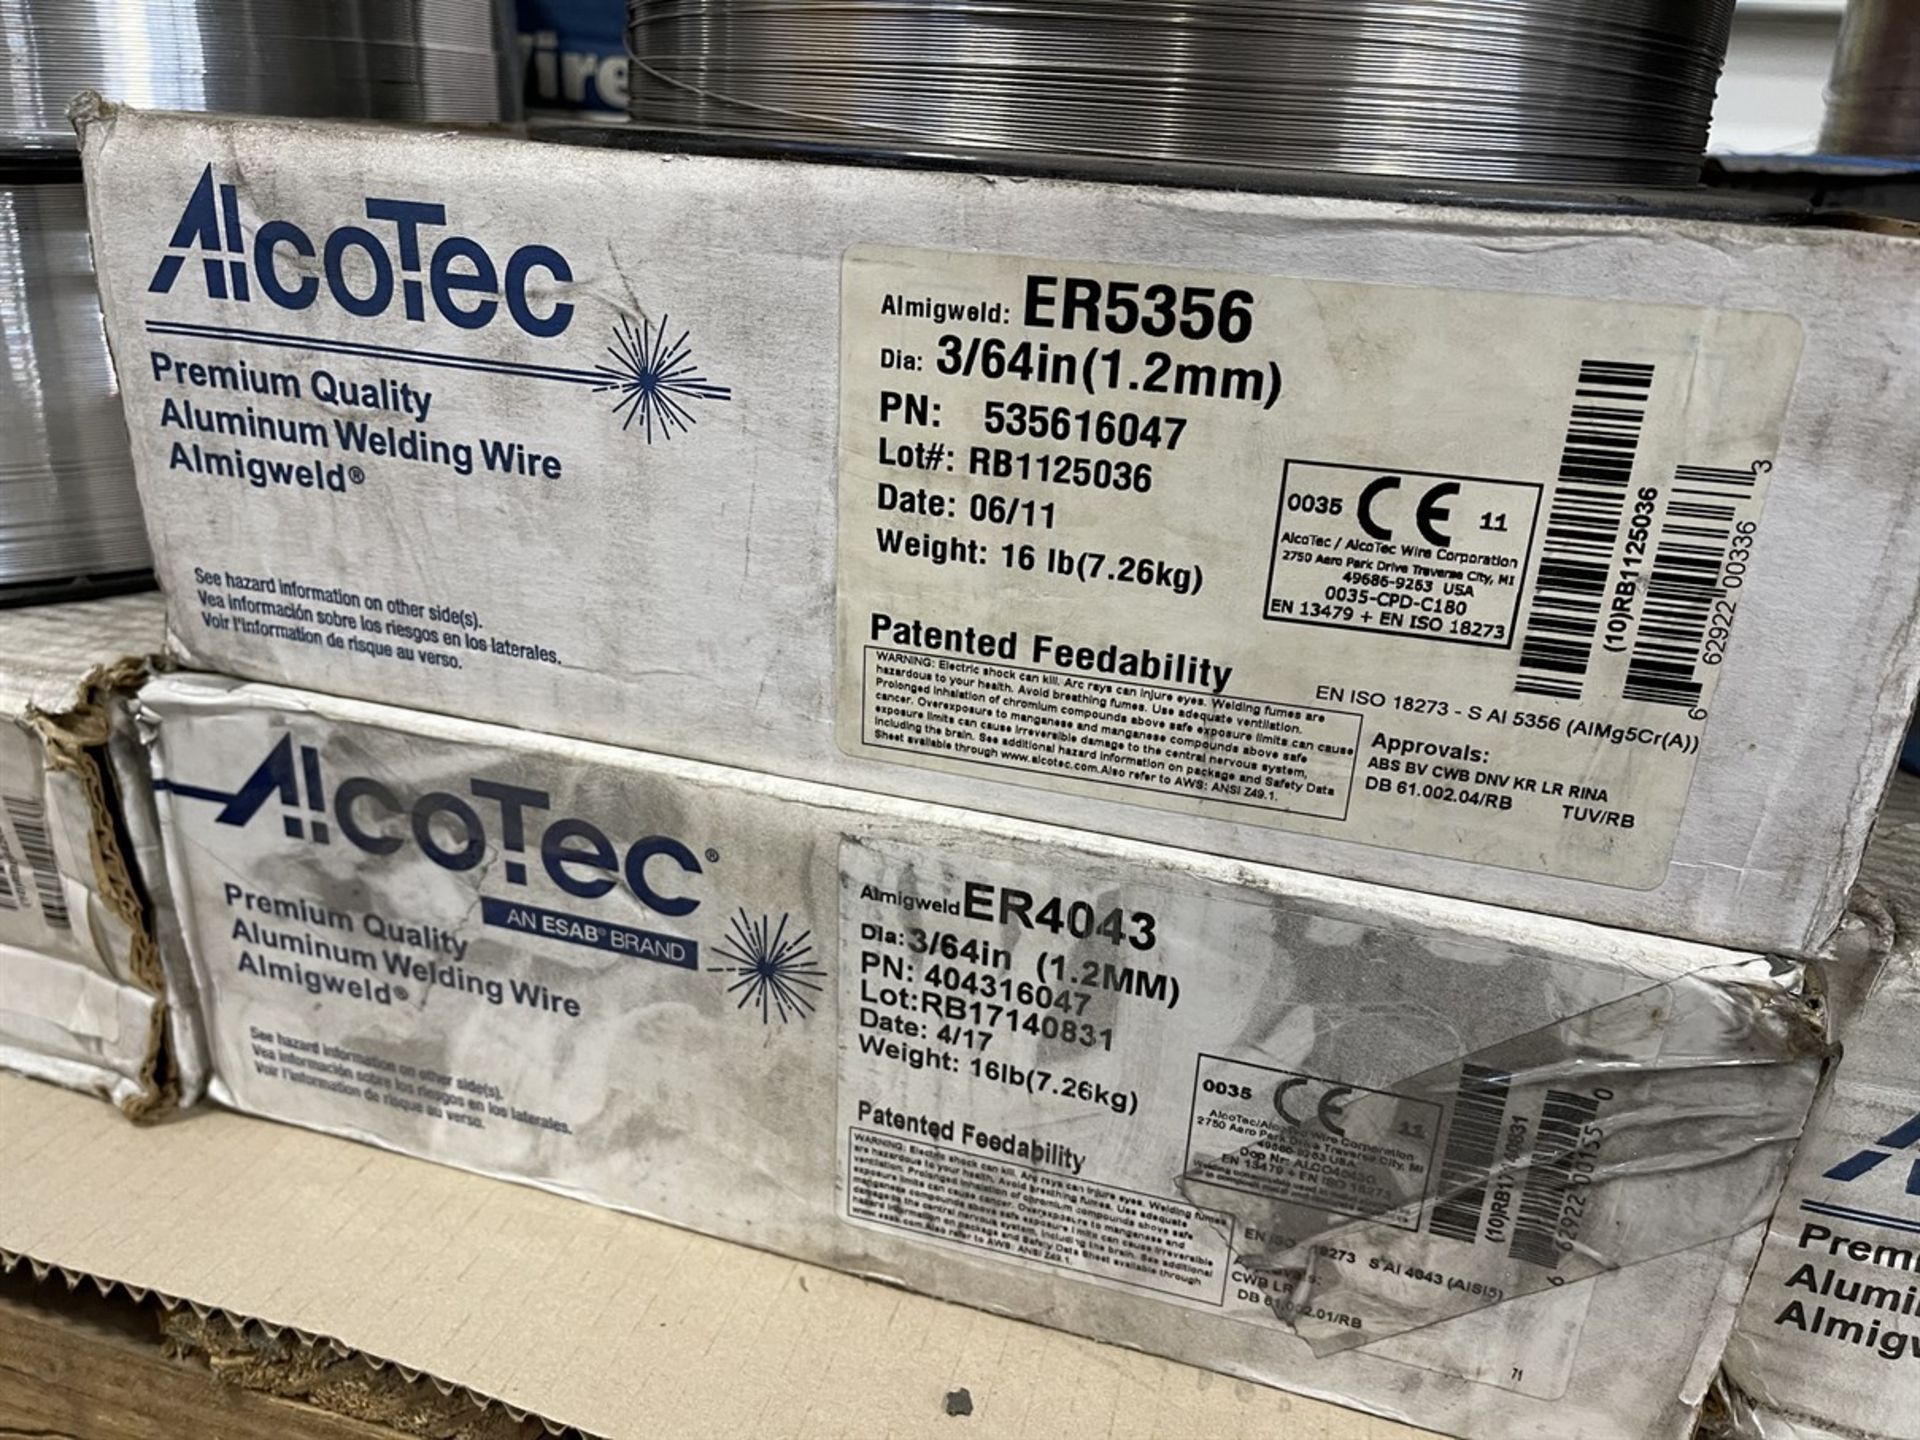 Lot of Assorted Welding Wire Spools and TIG Welding Rod Including AlcoTec ER5356, ER4043, Arcos - Image 3 of 8